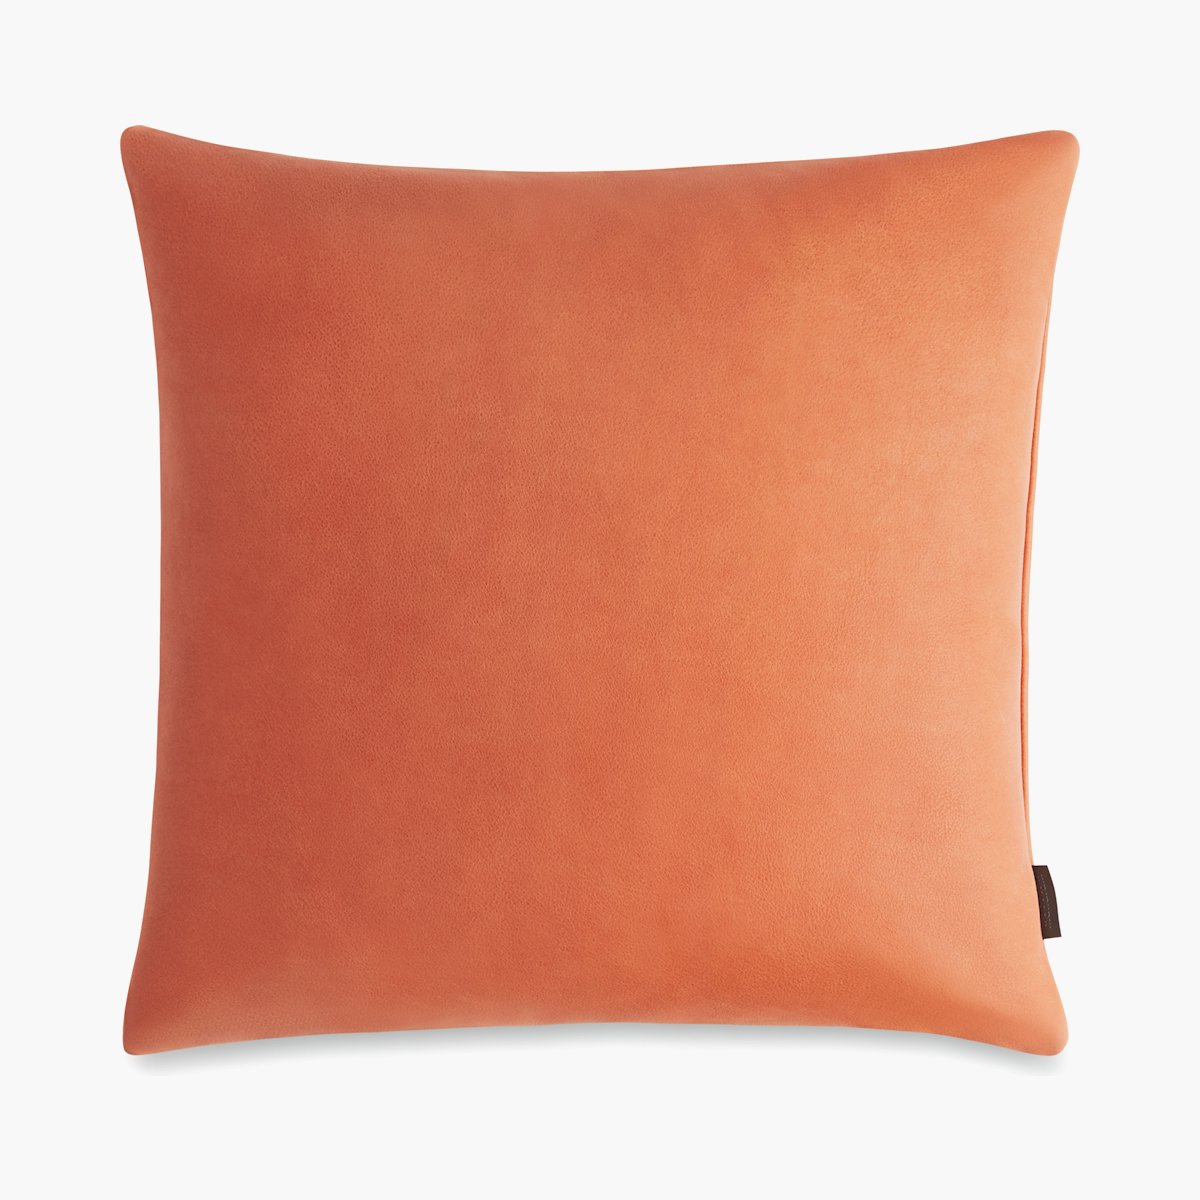 Loam Leather Pillow